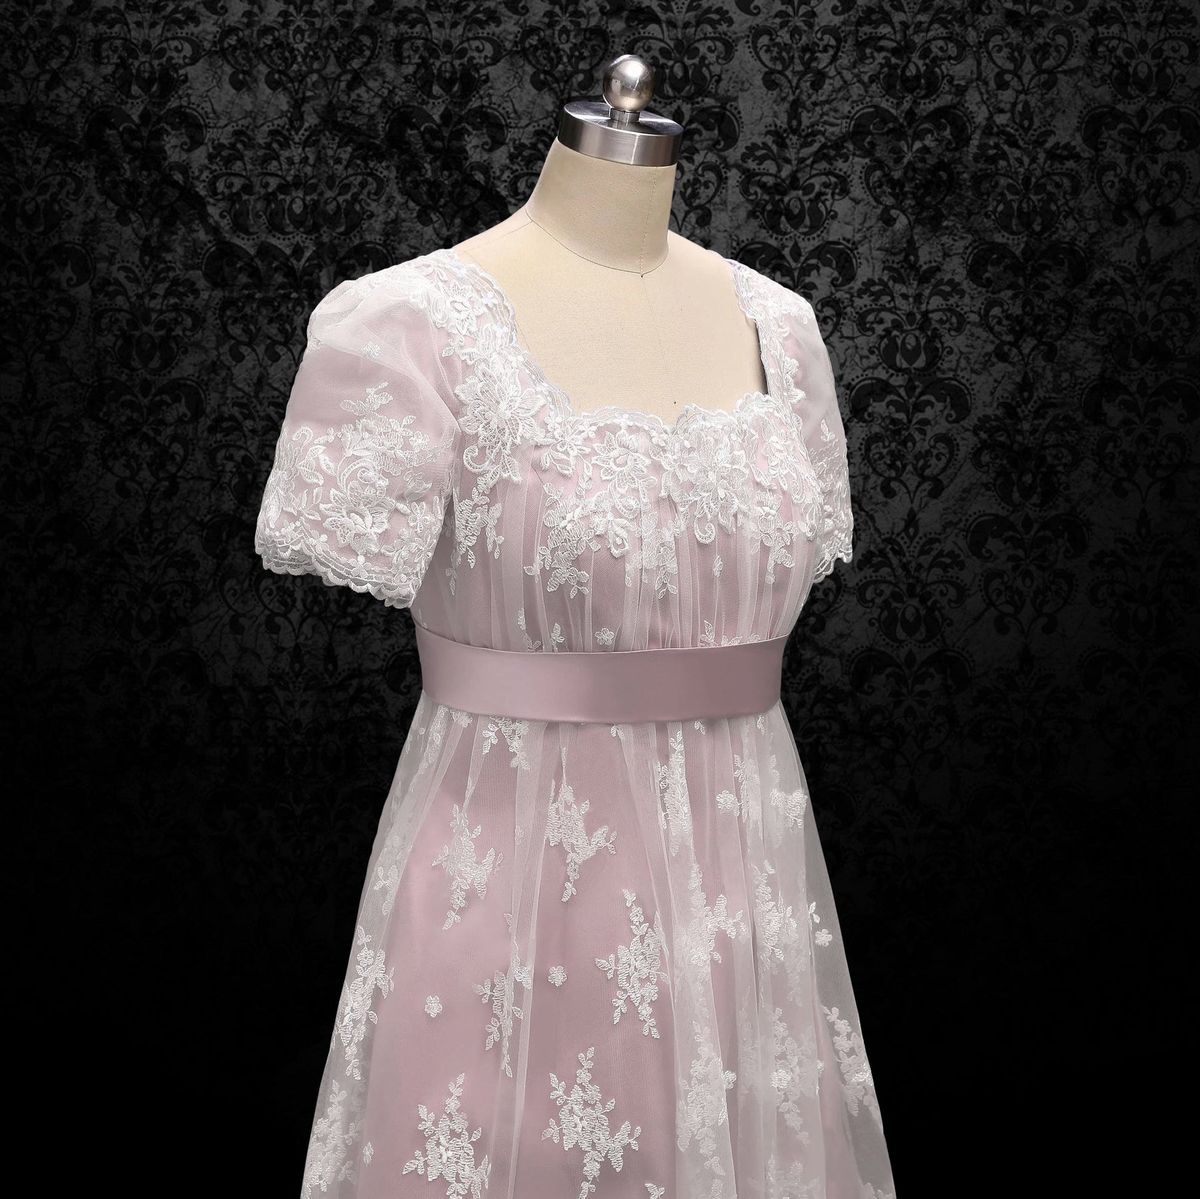 Wonderland By Lilian Plus Size 16 Prom Lace Pink A-line Dress on Queenly